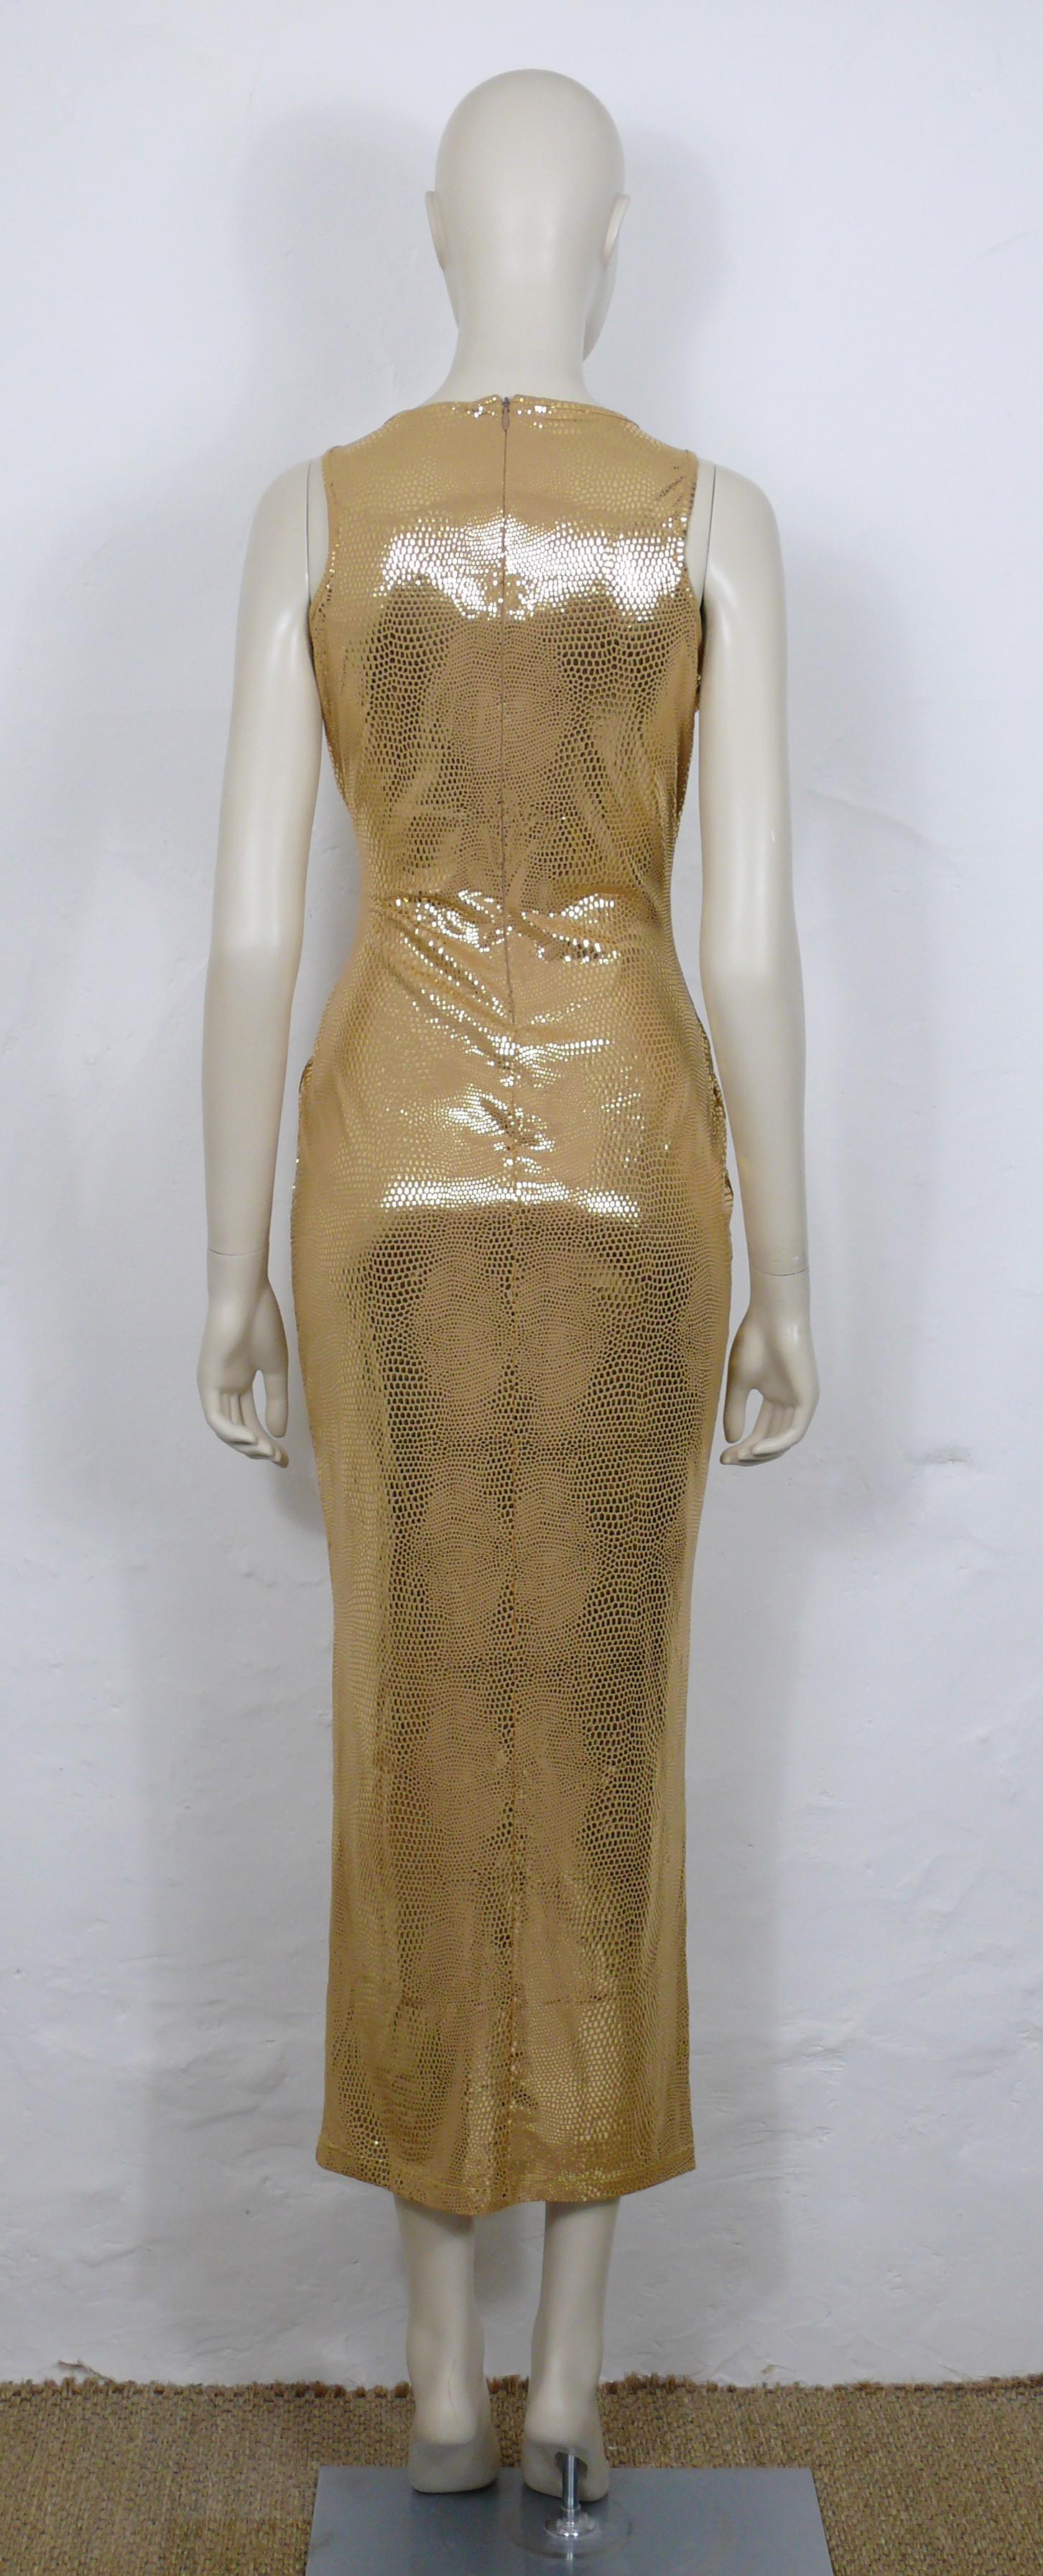 Brown Thierry Mugler Vintage 1998 Gold Reptile Skin Like Body-Conscious Dress Size S